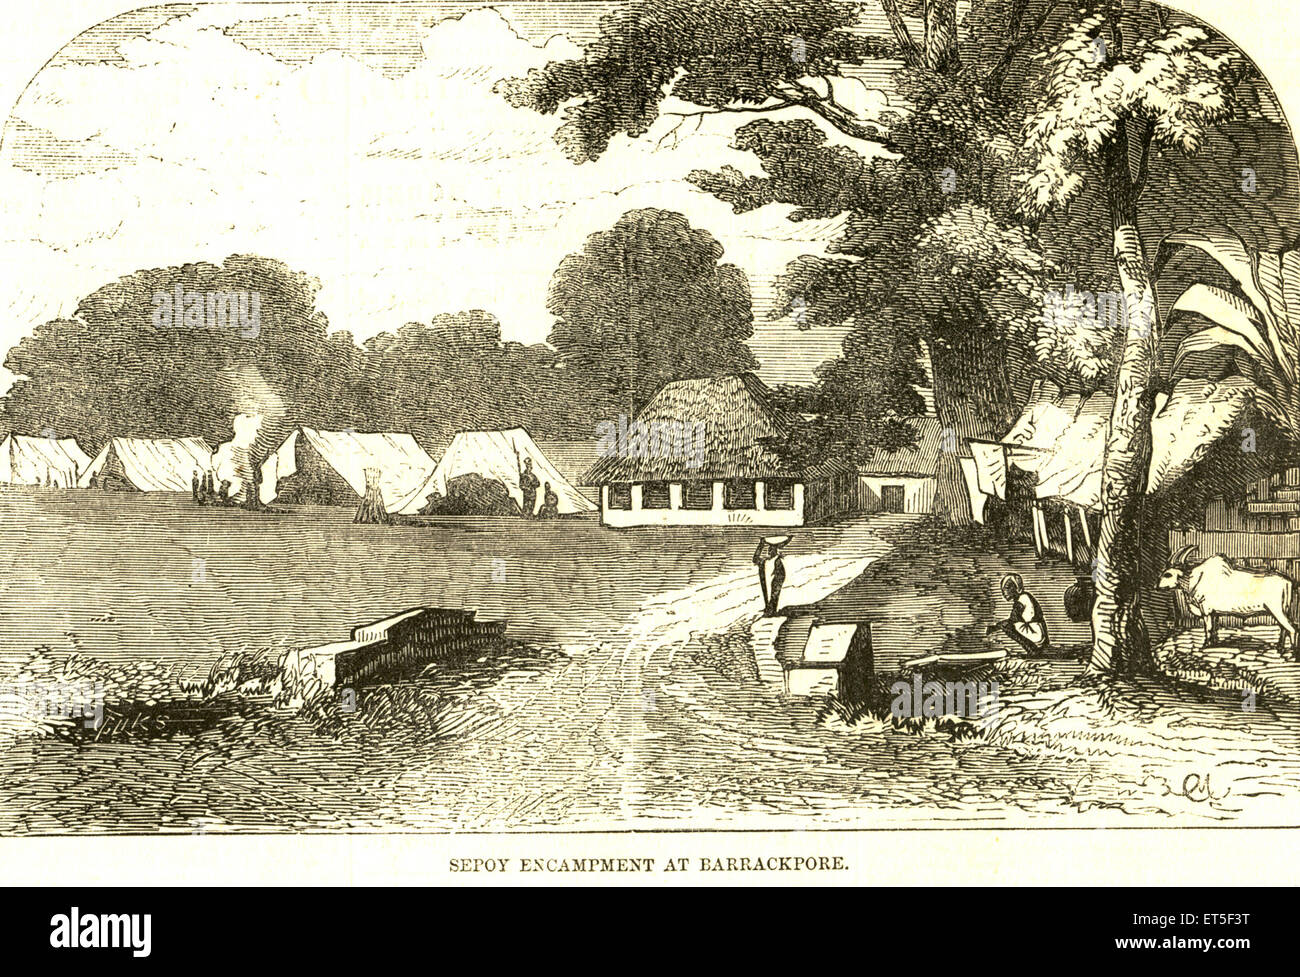 Sepoy soldier encampment, Barrackpore, Barrackpur, West Bengal, India, Indian Rebellion, Mutiny views, Sepoy Mutiny, vintage 1800s picture Stock Photo